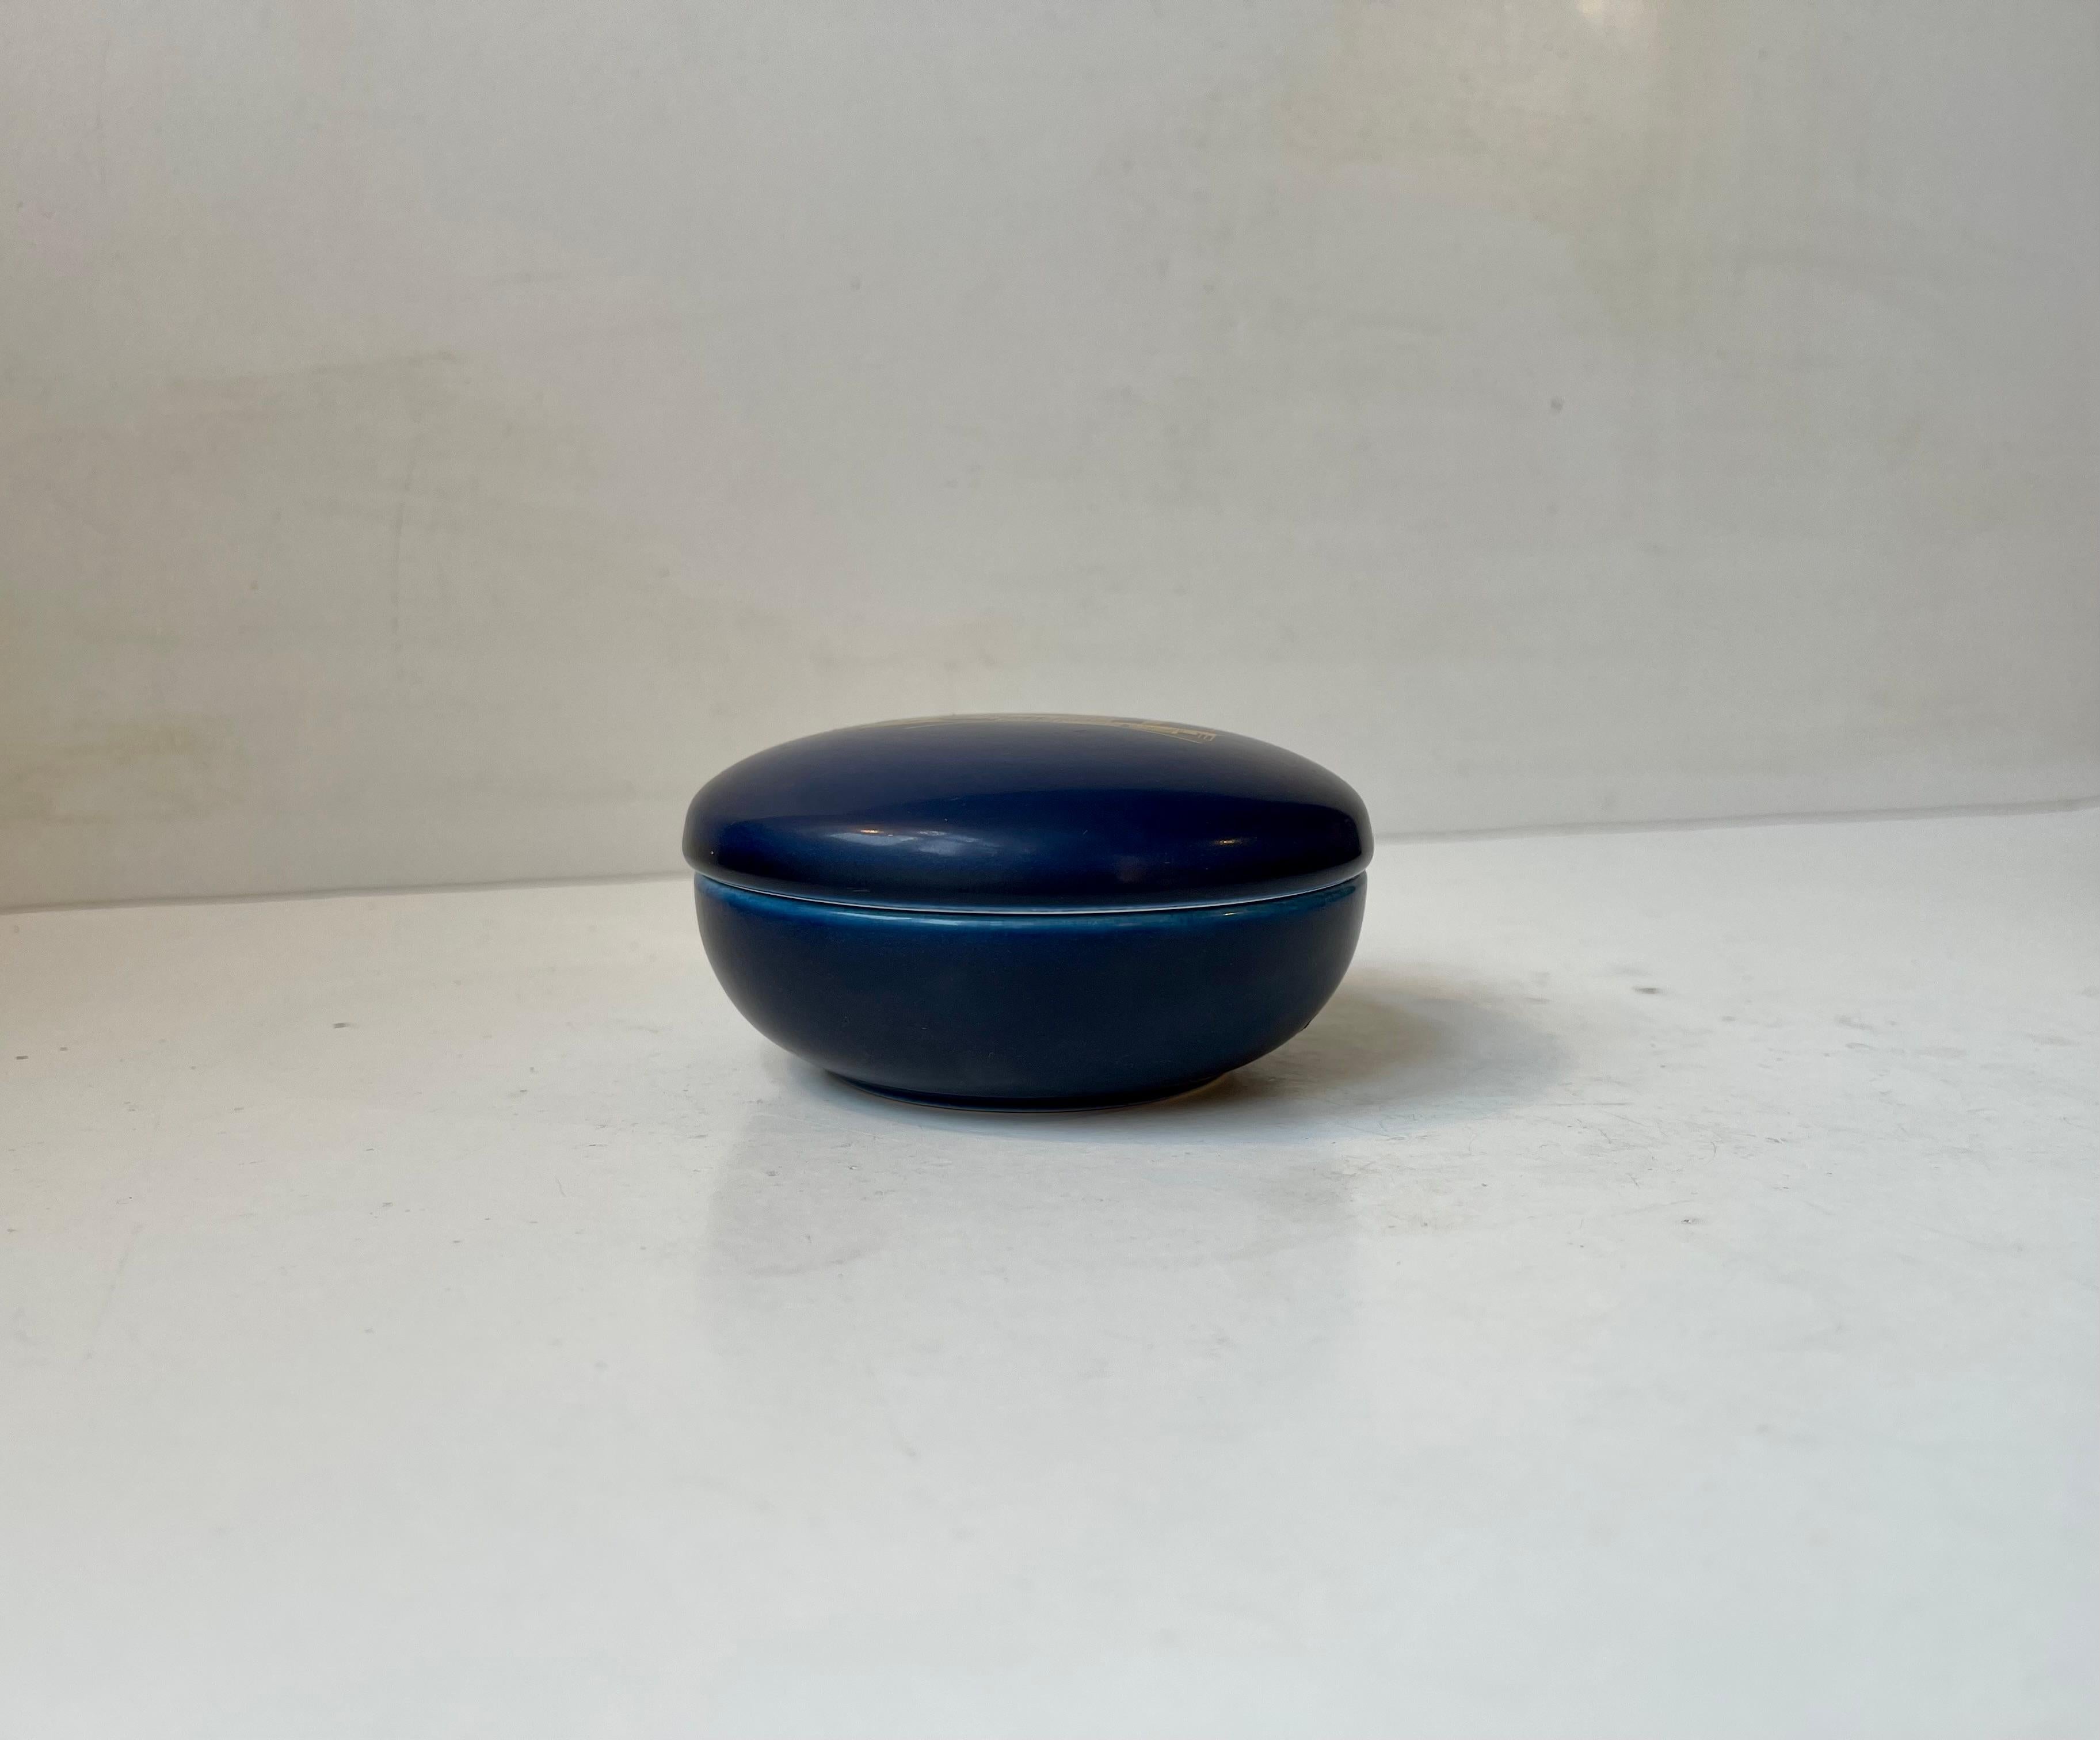 Ceramic Trinket designed by Nils Thorsson and manufactured by Aluminia in Denmark during the 1950s. Decorated in a vibrant blue glaze and featuring a piece of Danish Hospital or School Architecture in gold glaze/foliage. It can be used as a trinket